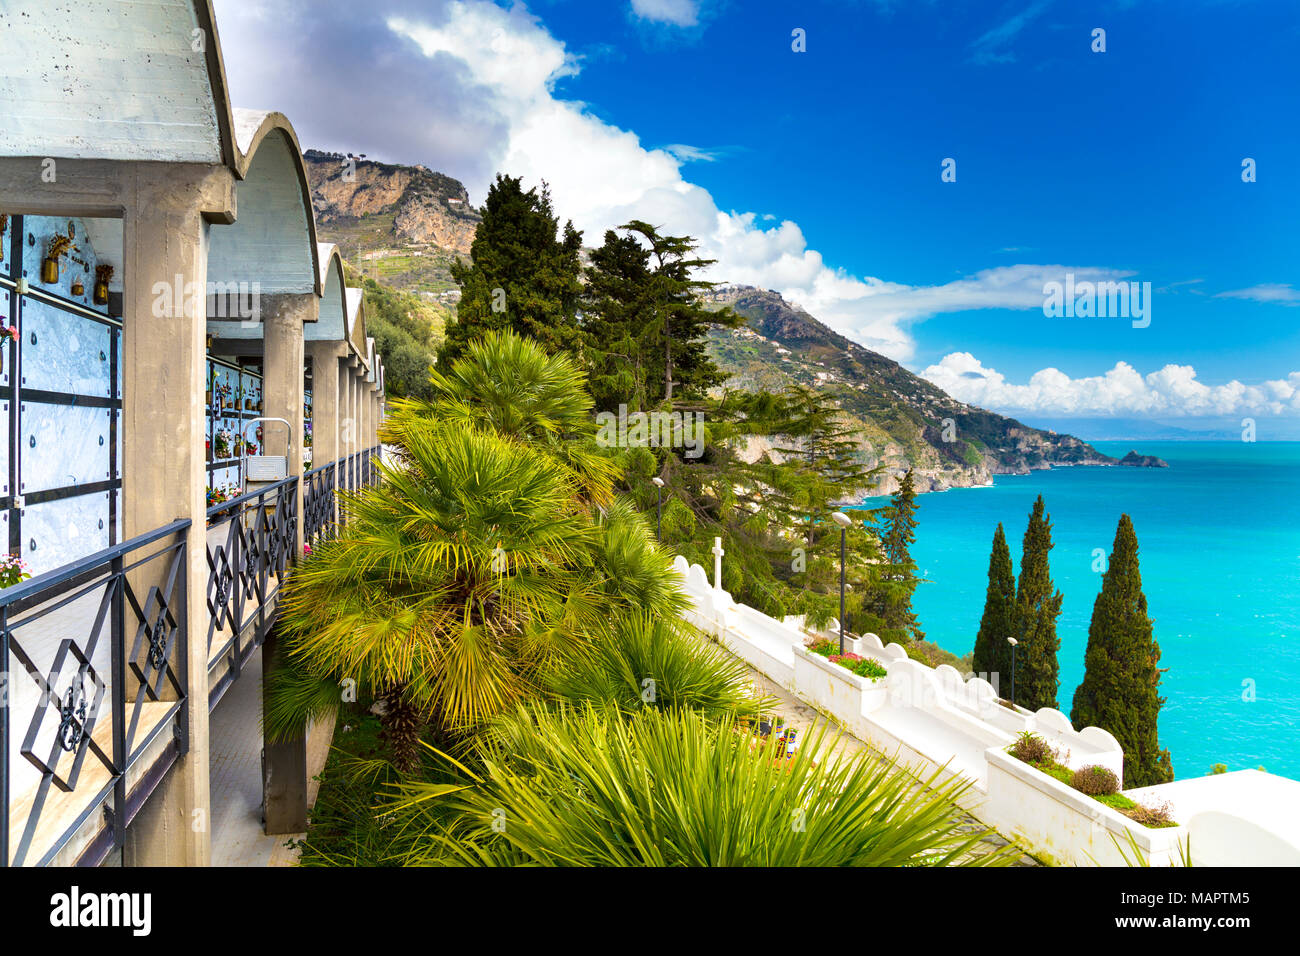 View from a small cemetery overlooking the sea in Praiano, Amalfi Coast, Italy Stock Photo